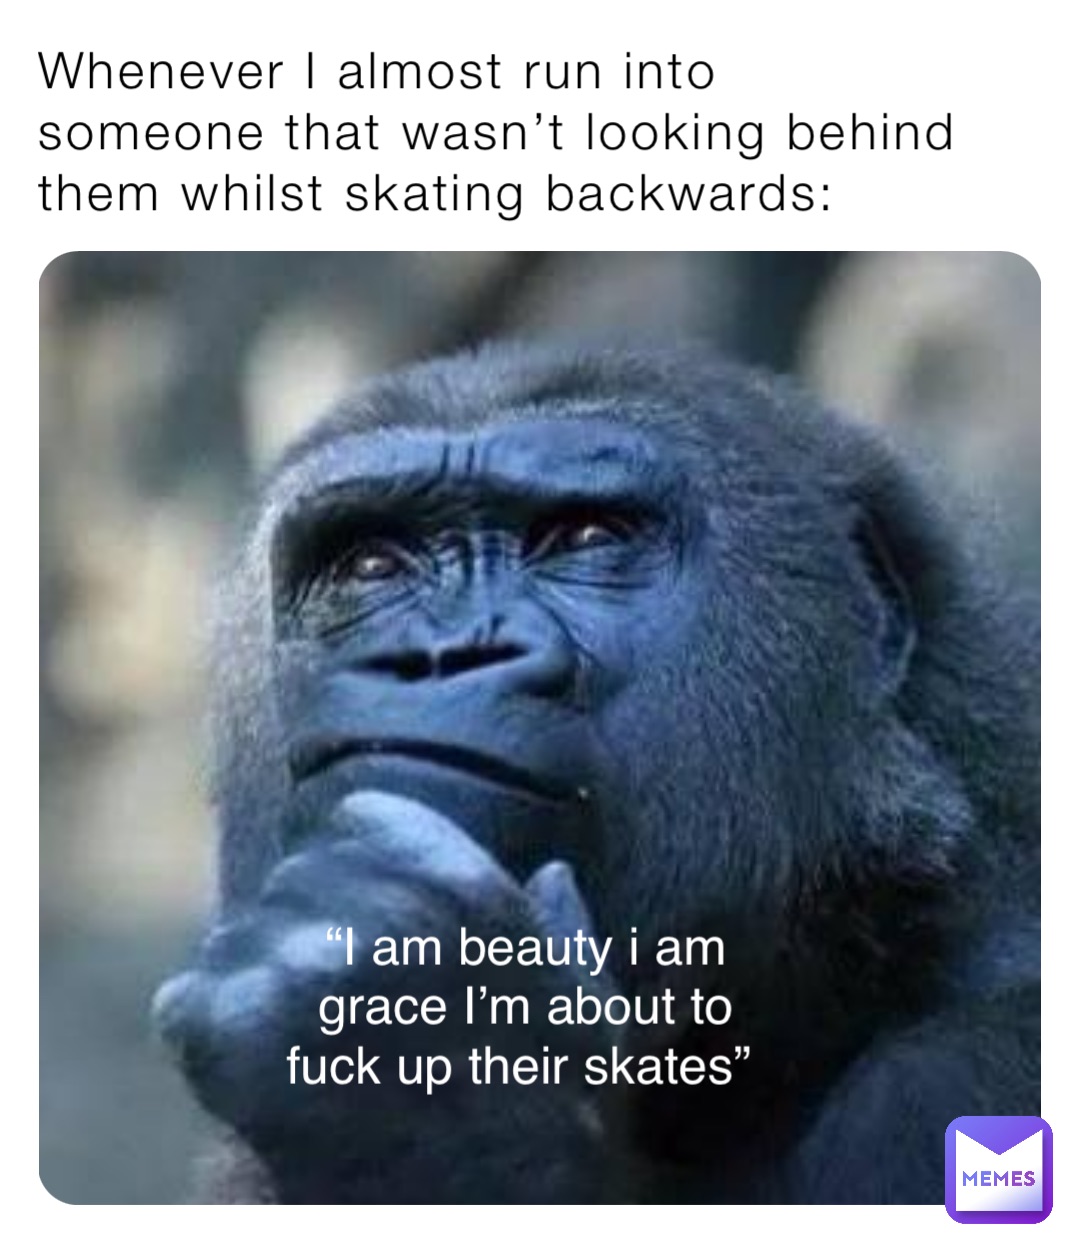 Whenever I almost run into someone that wasn’t looking behind them whilst skating backwards: “I am beauty i am 
grace I’m about to 
fuck up their skates”